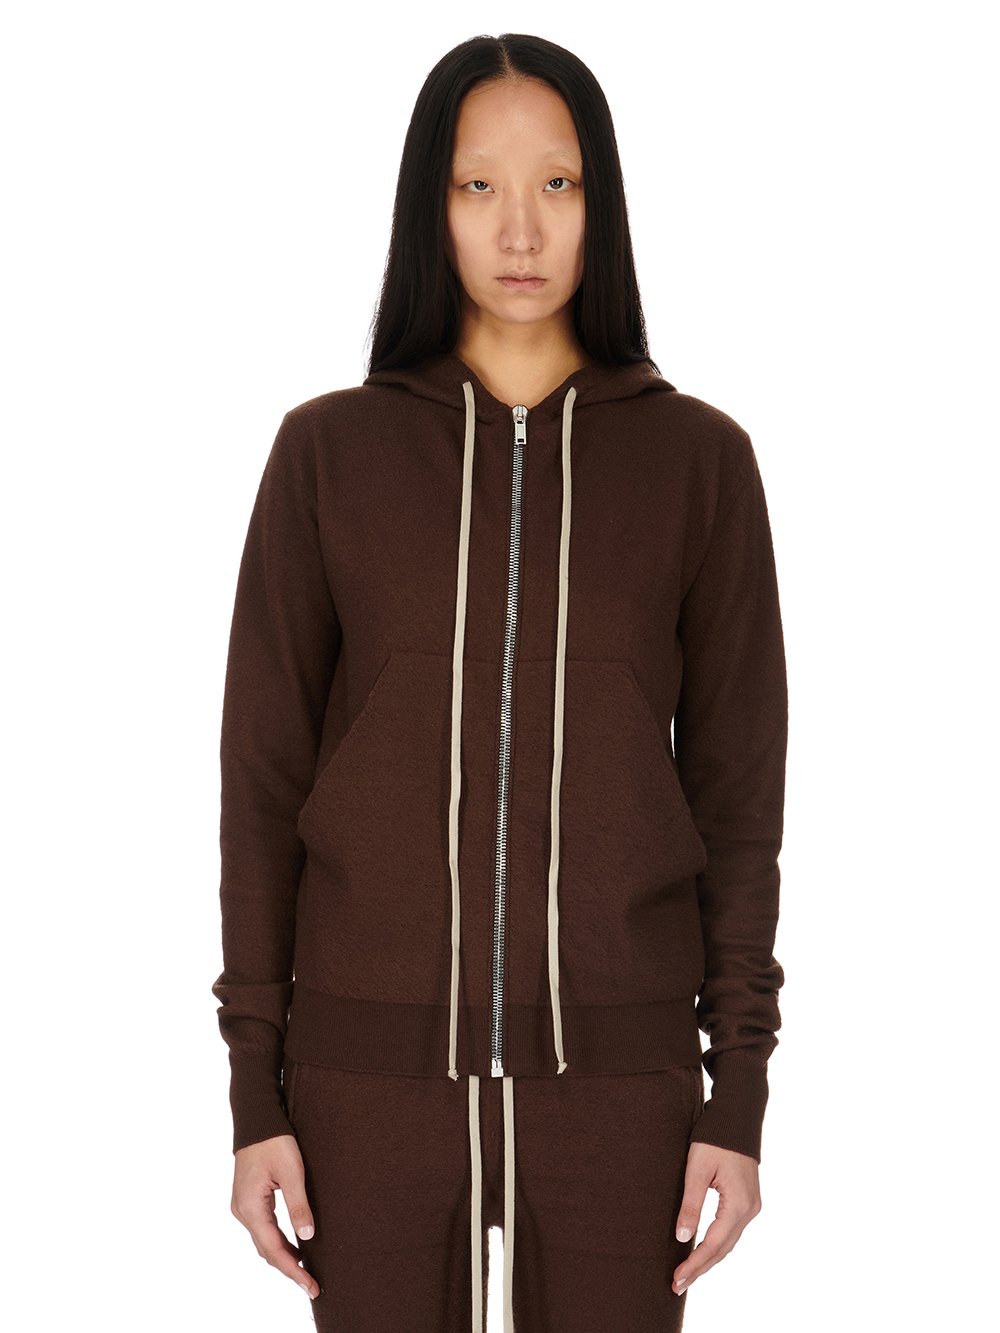 RICK OWENS FW23 LUXOR ZIPPED HOODIE IN BROWN BOILED CASHMERE KNIT